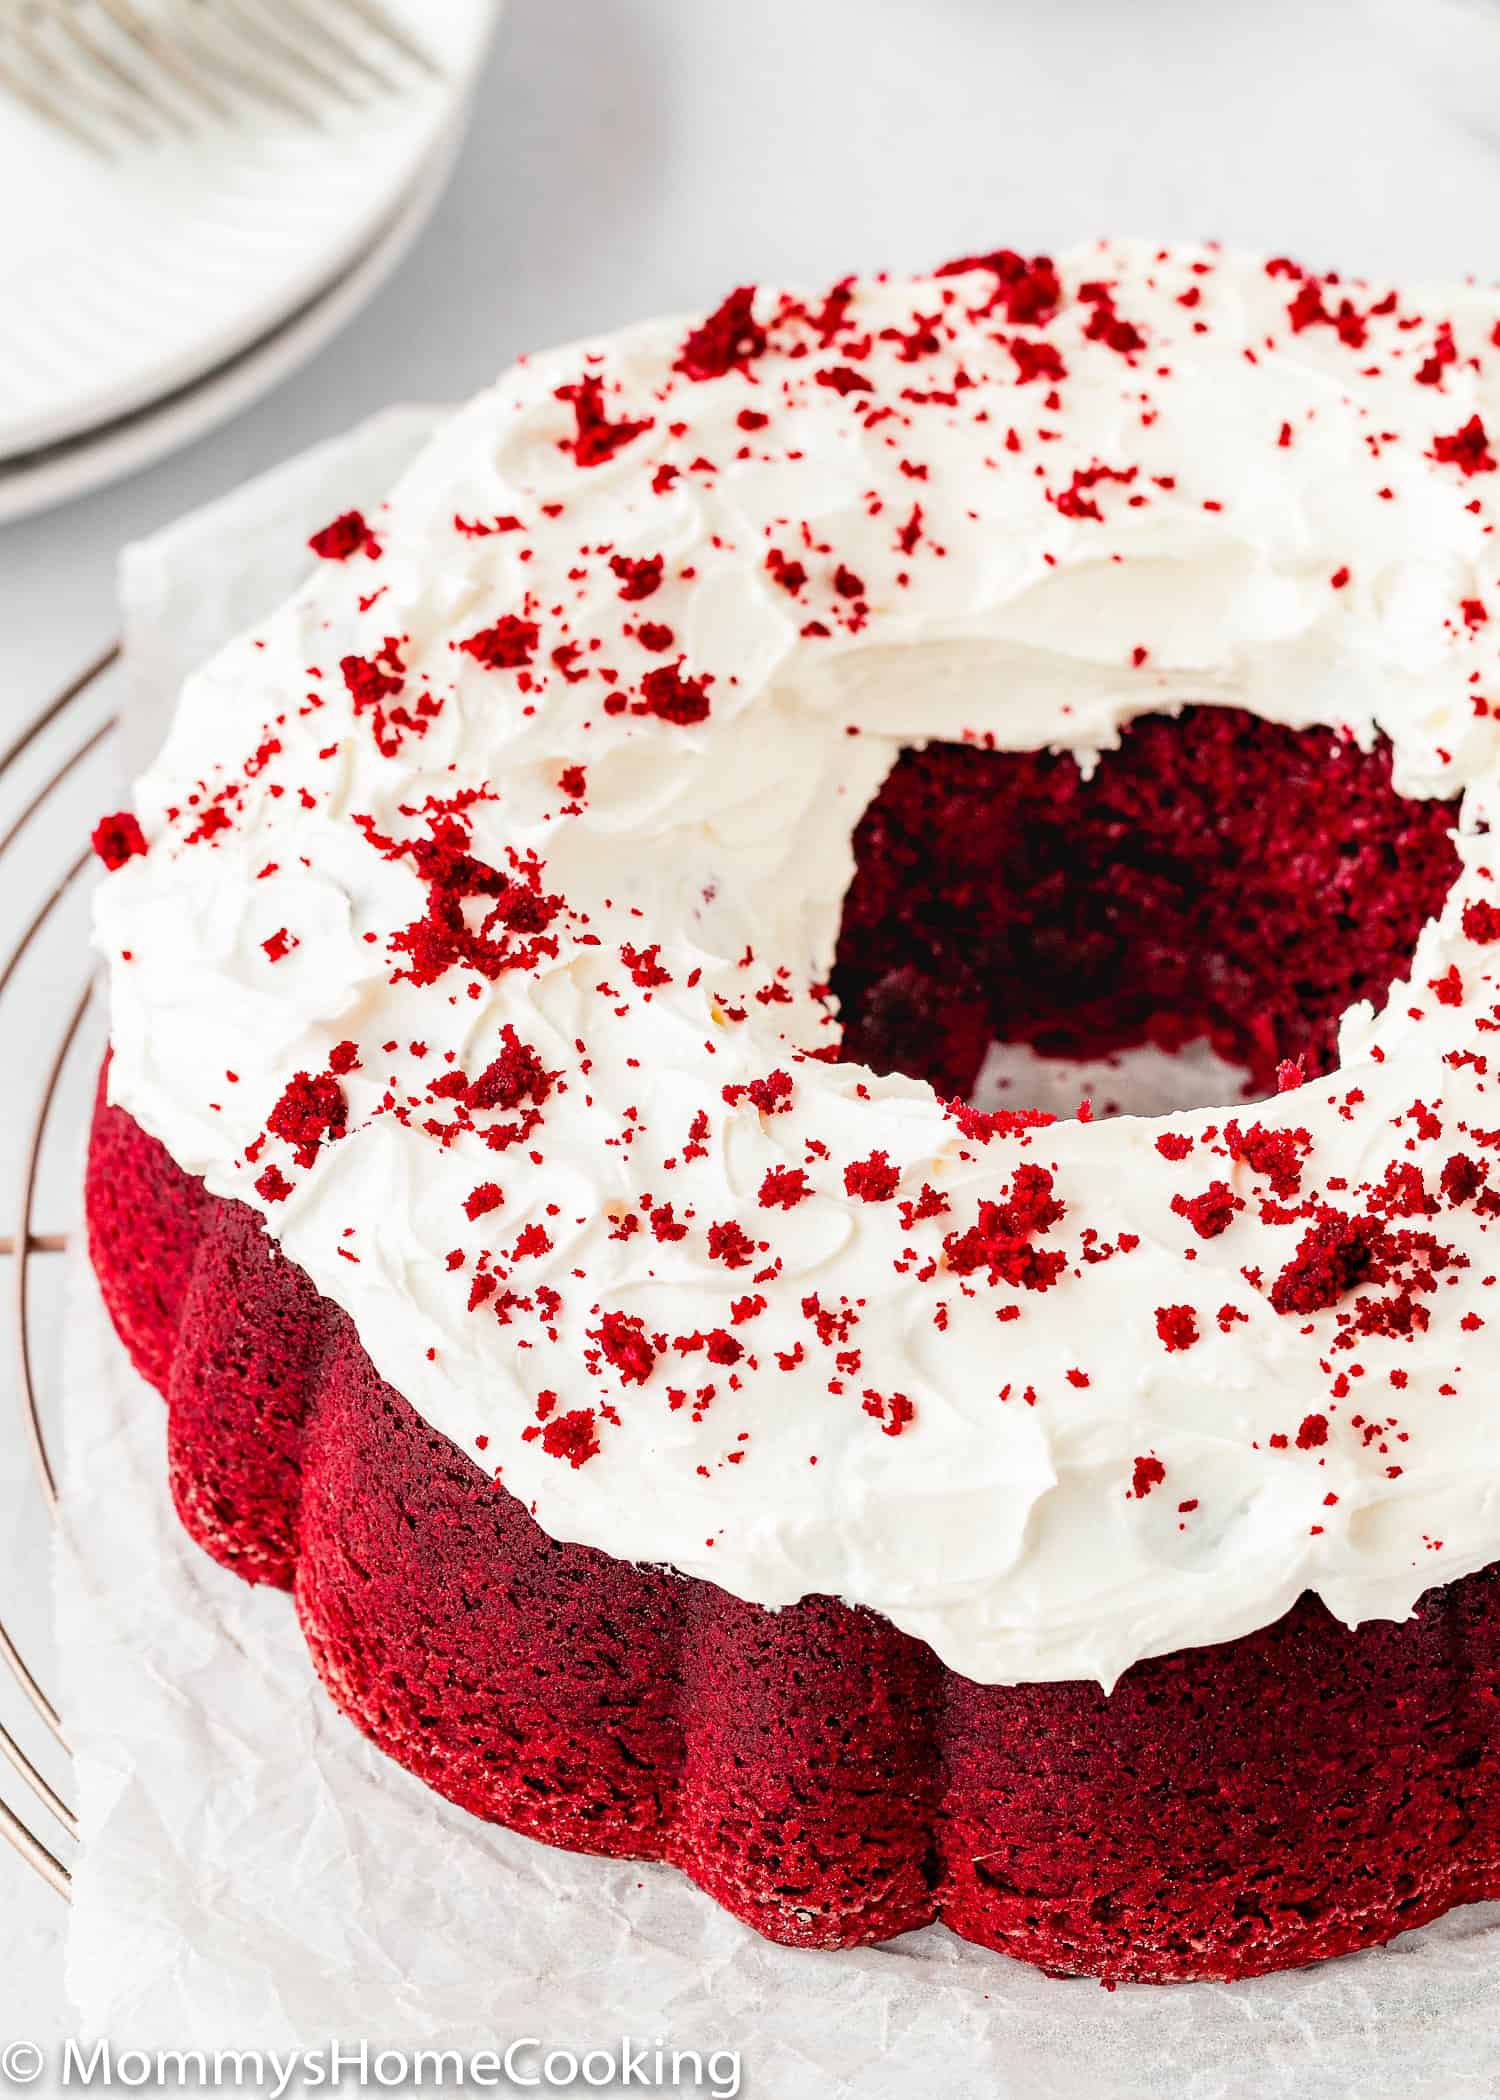 Eggless Red Velvet Bundt Cake topped with Cream cheese frosting